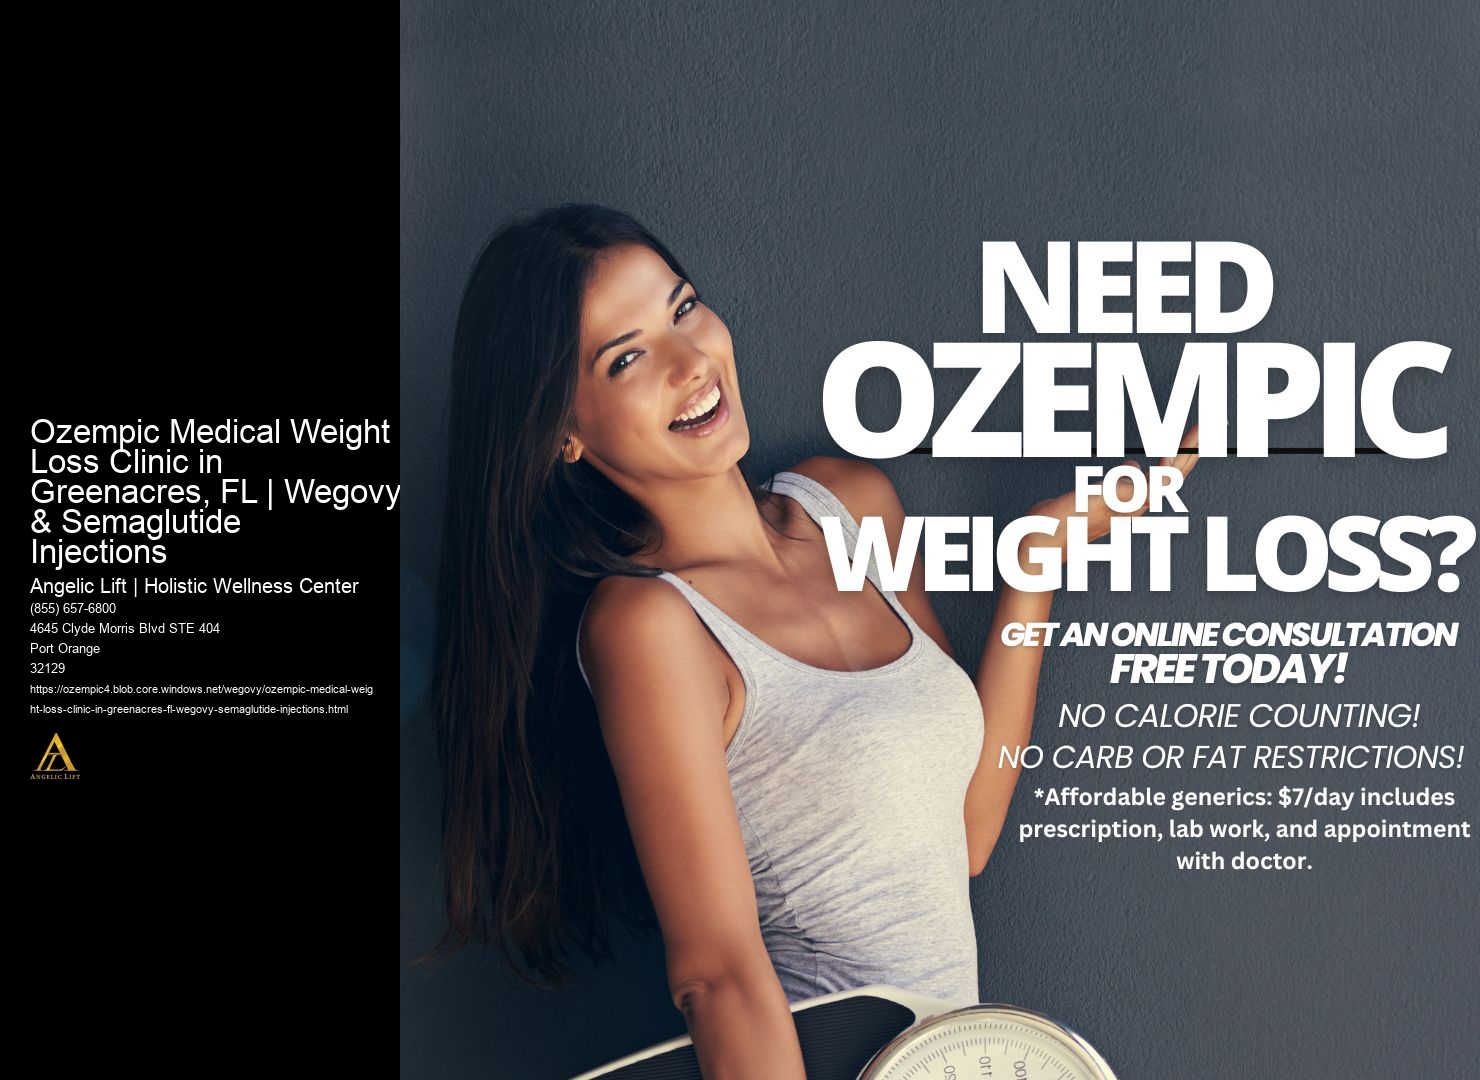 Ozempic Medical Weight Loss Clinic in Greenacres, FL | Wegovy & Semaglutide Injections